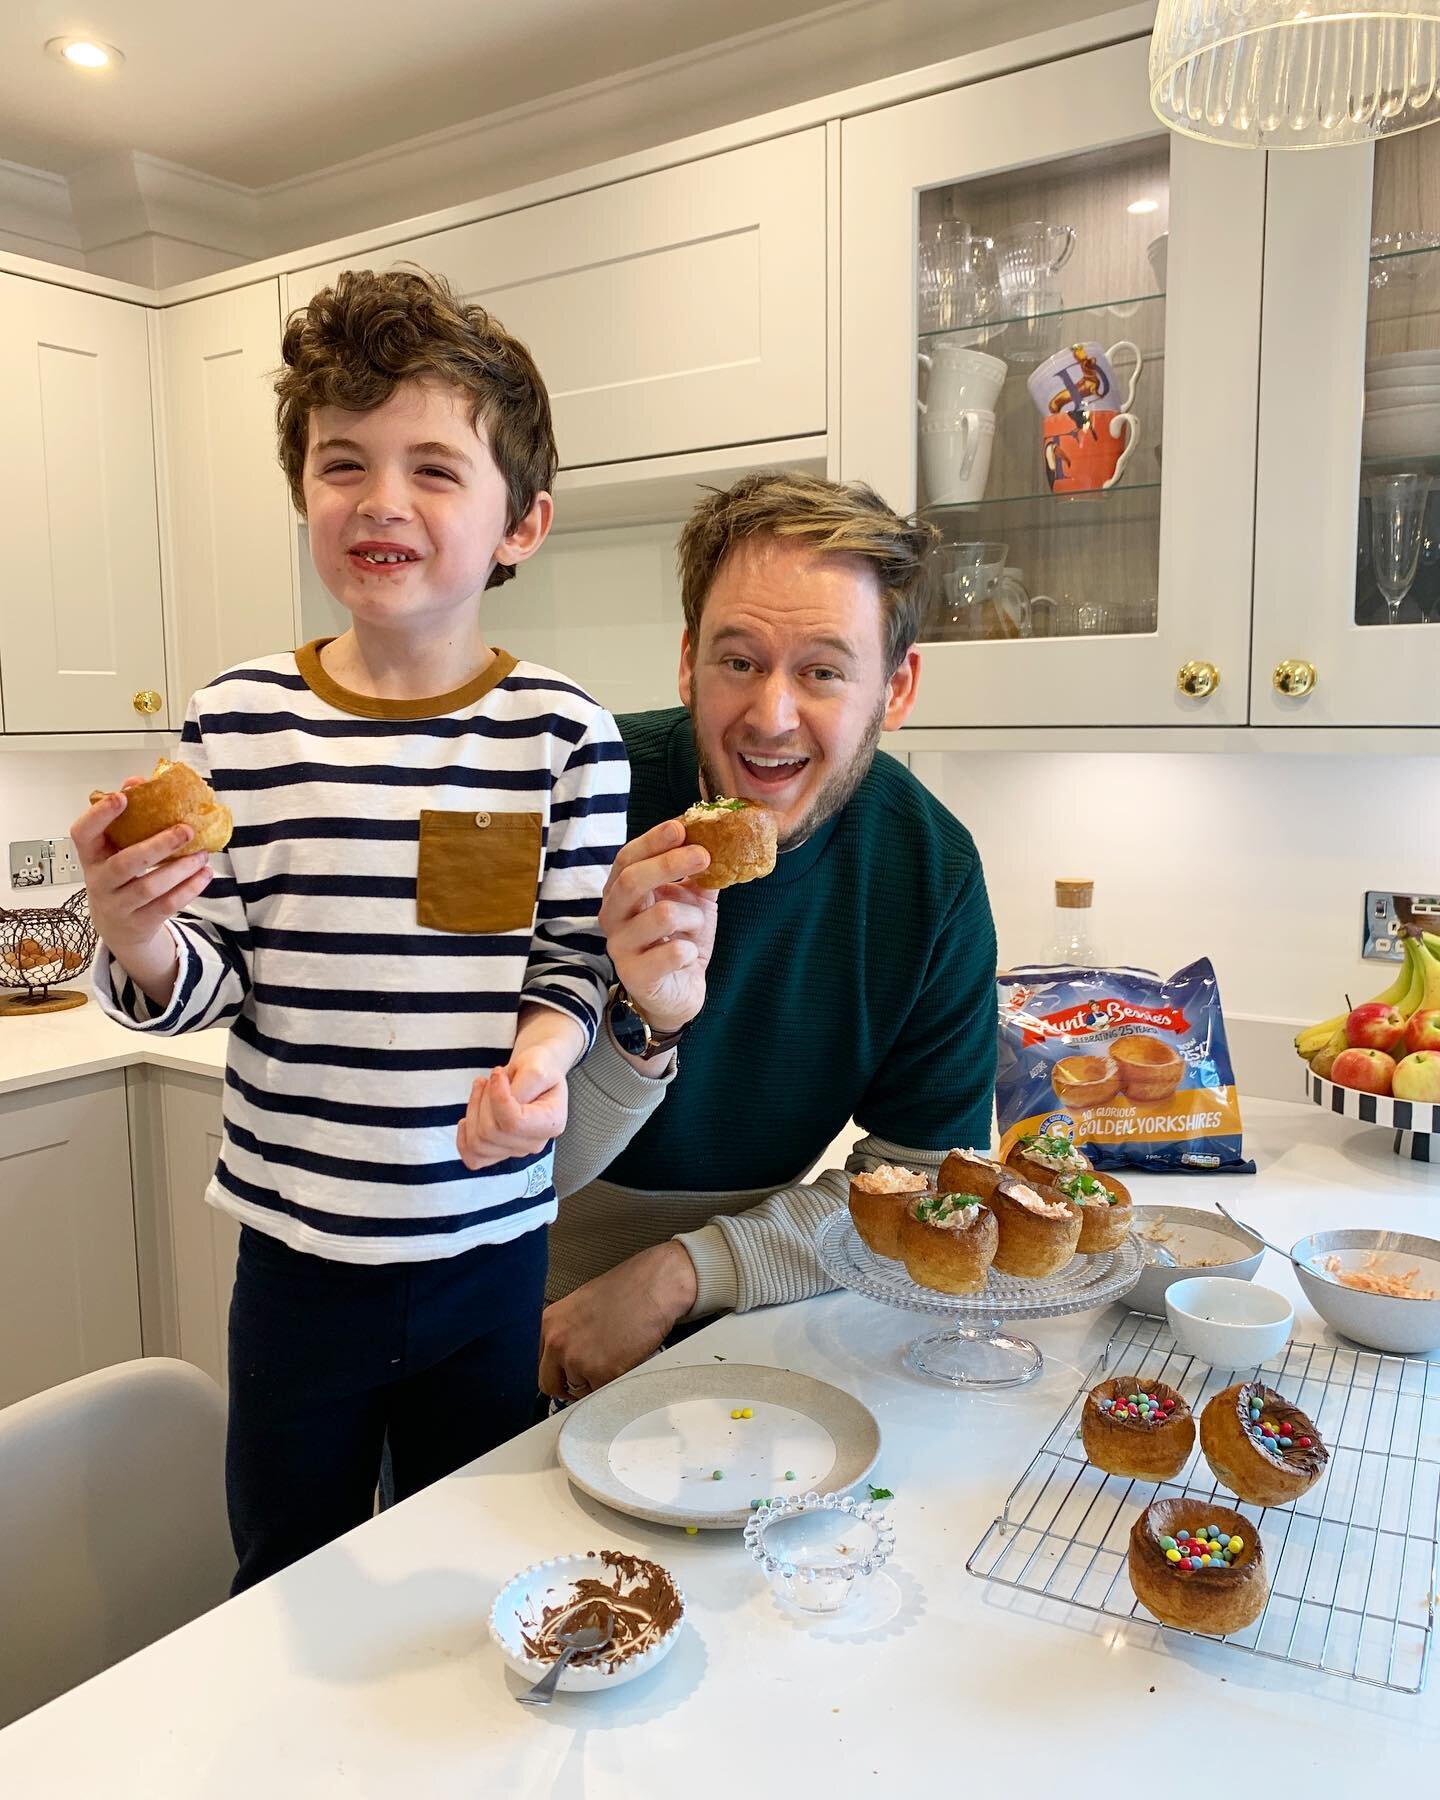 Welcome to the Unlikely Cafe where we are now serving our very own take on Afternoon Tea!
 
Okay, real talk, we have exhausted EVERY. SINGLE. SNACK in this house so we&rsquo;re getting creative with some @auntbessiesofficial Yorkshire Puddings. Now I